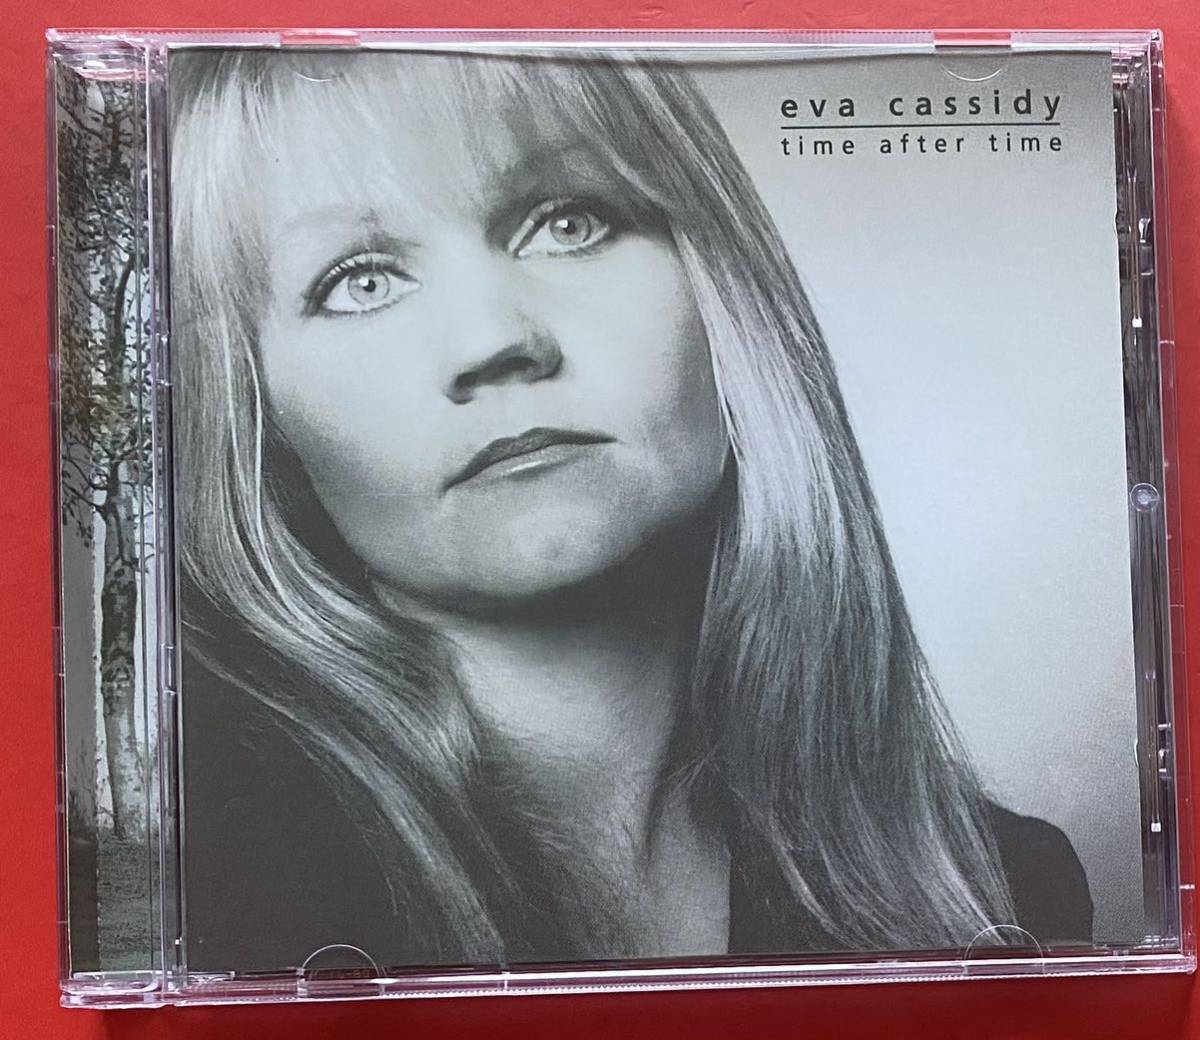 【CD】Eva Cassidy「Time After Time」 エヴァ・キャシディ 輸入盤 [04261100]_画像1